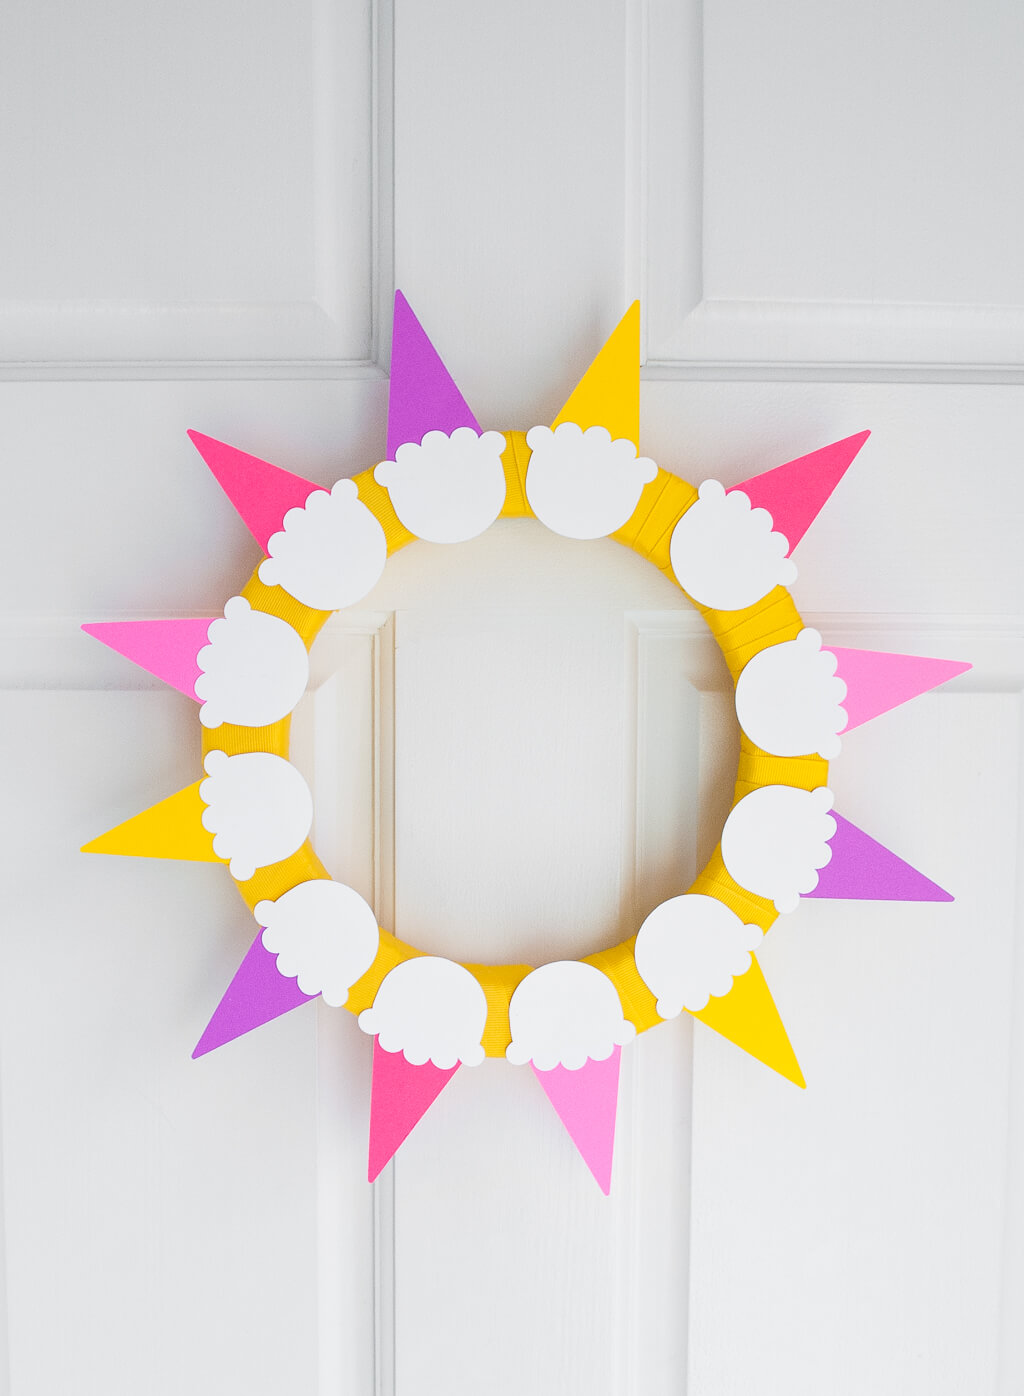 Easy DIY summer ice cream wreath that looks like rays of sunshine! Make it for your front door in less than one hour.